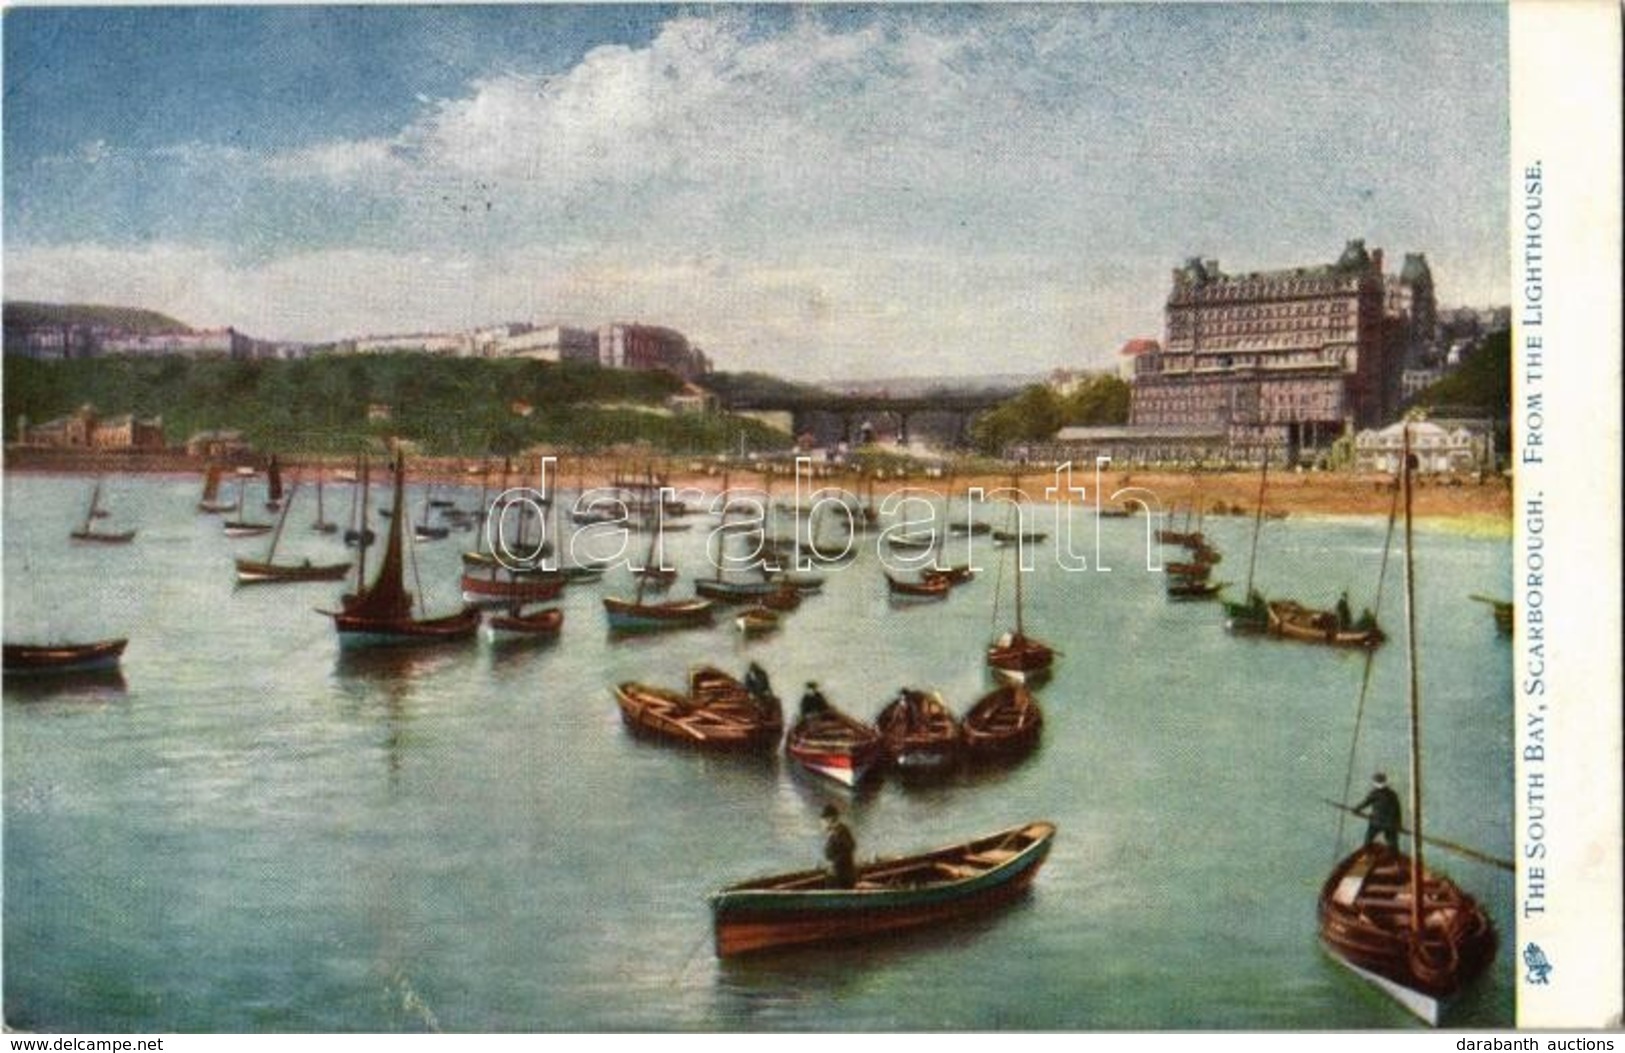 T2 1903 Scarborough, South Bay, View From The Lighthouse, Sailing Boats; Raphael Tuck & Sons 'View' Series 775. - Sin Clasificación